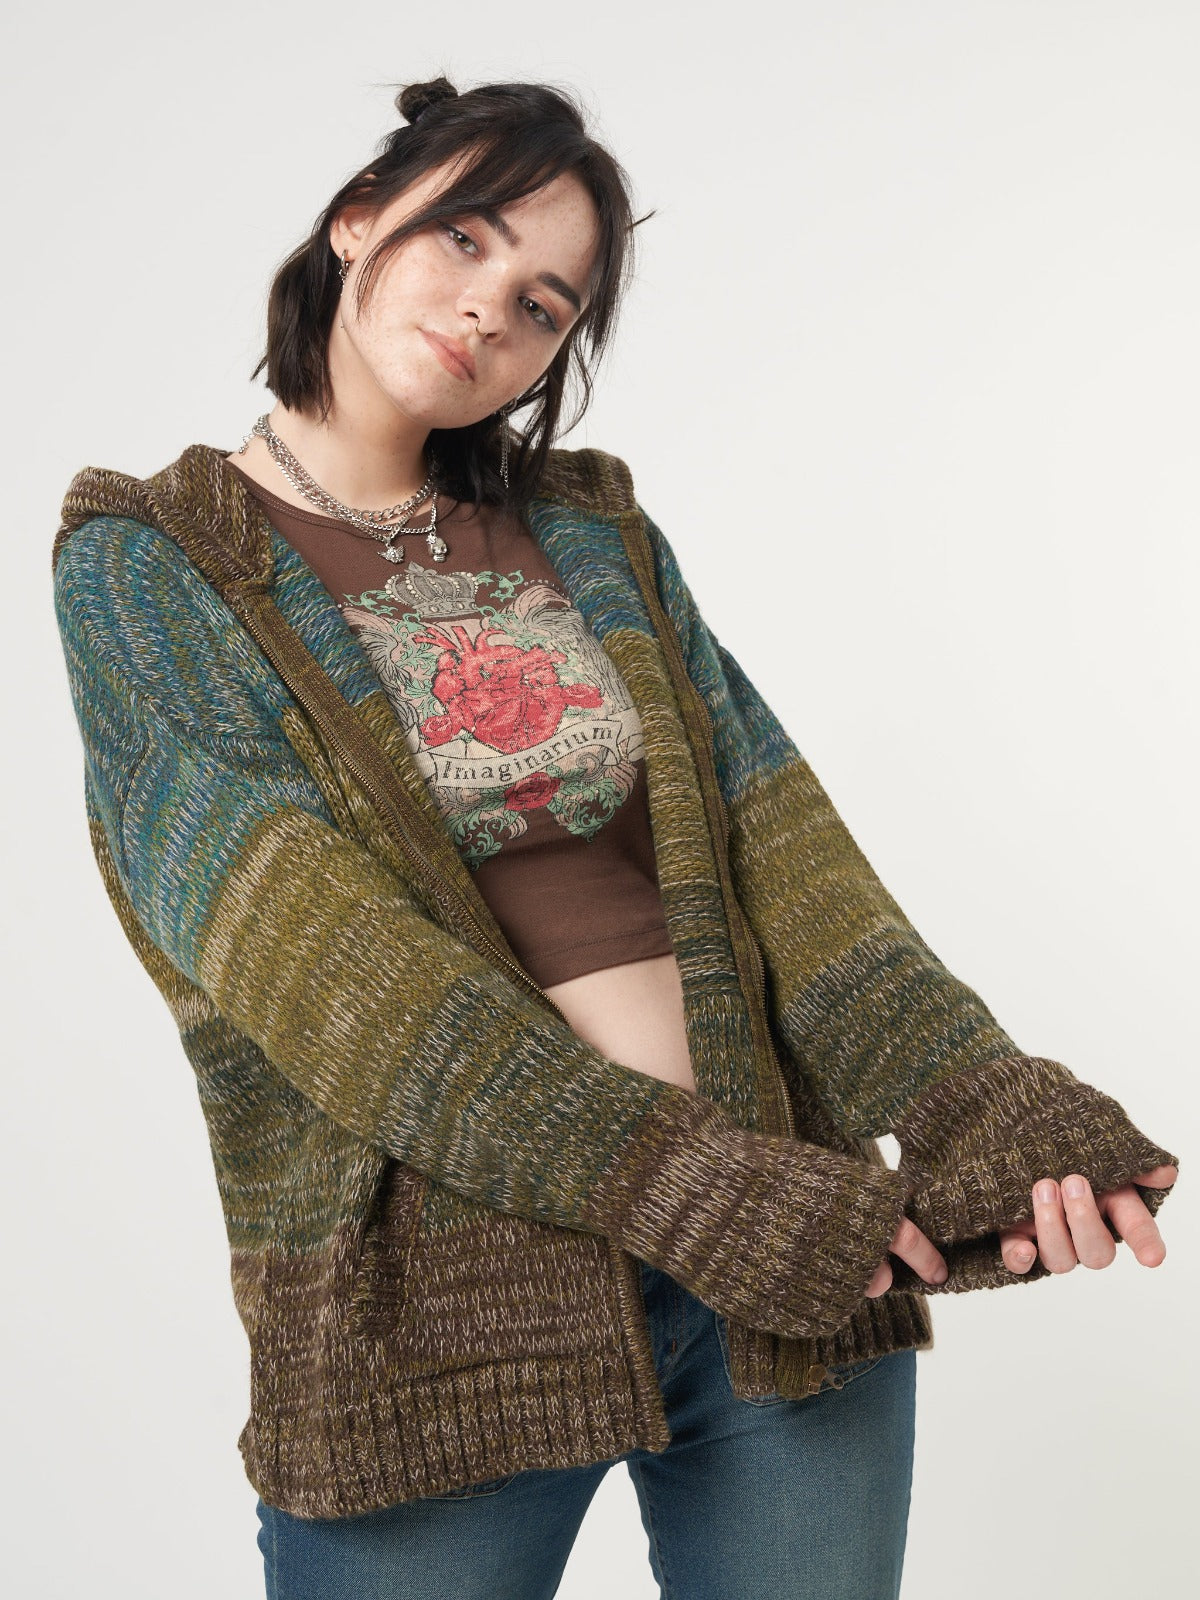 Zip up hood knitted cardigan featuring degrade striped in green, brown and blue tones